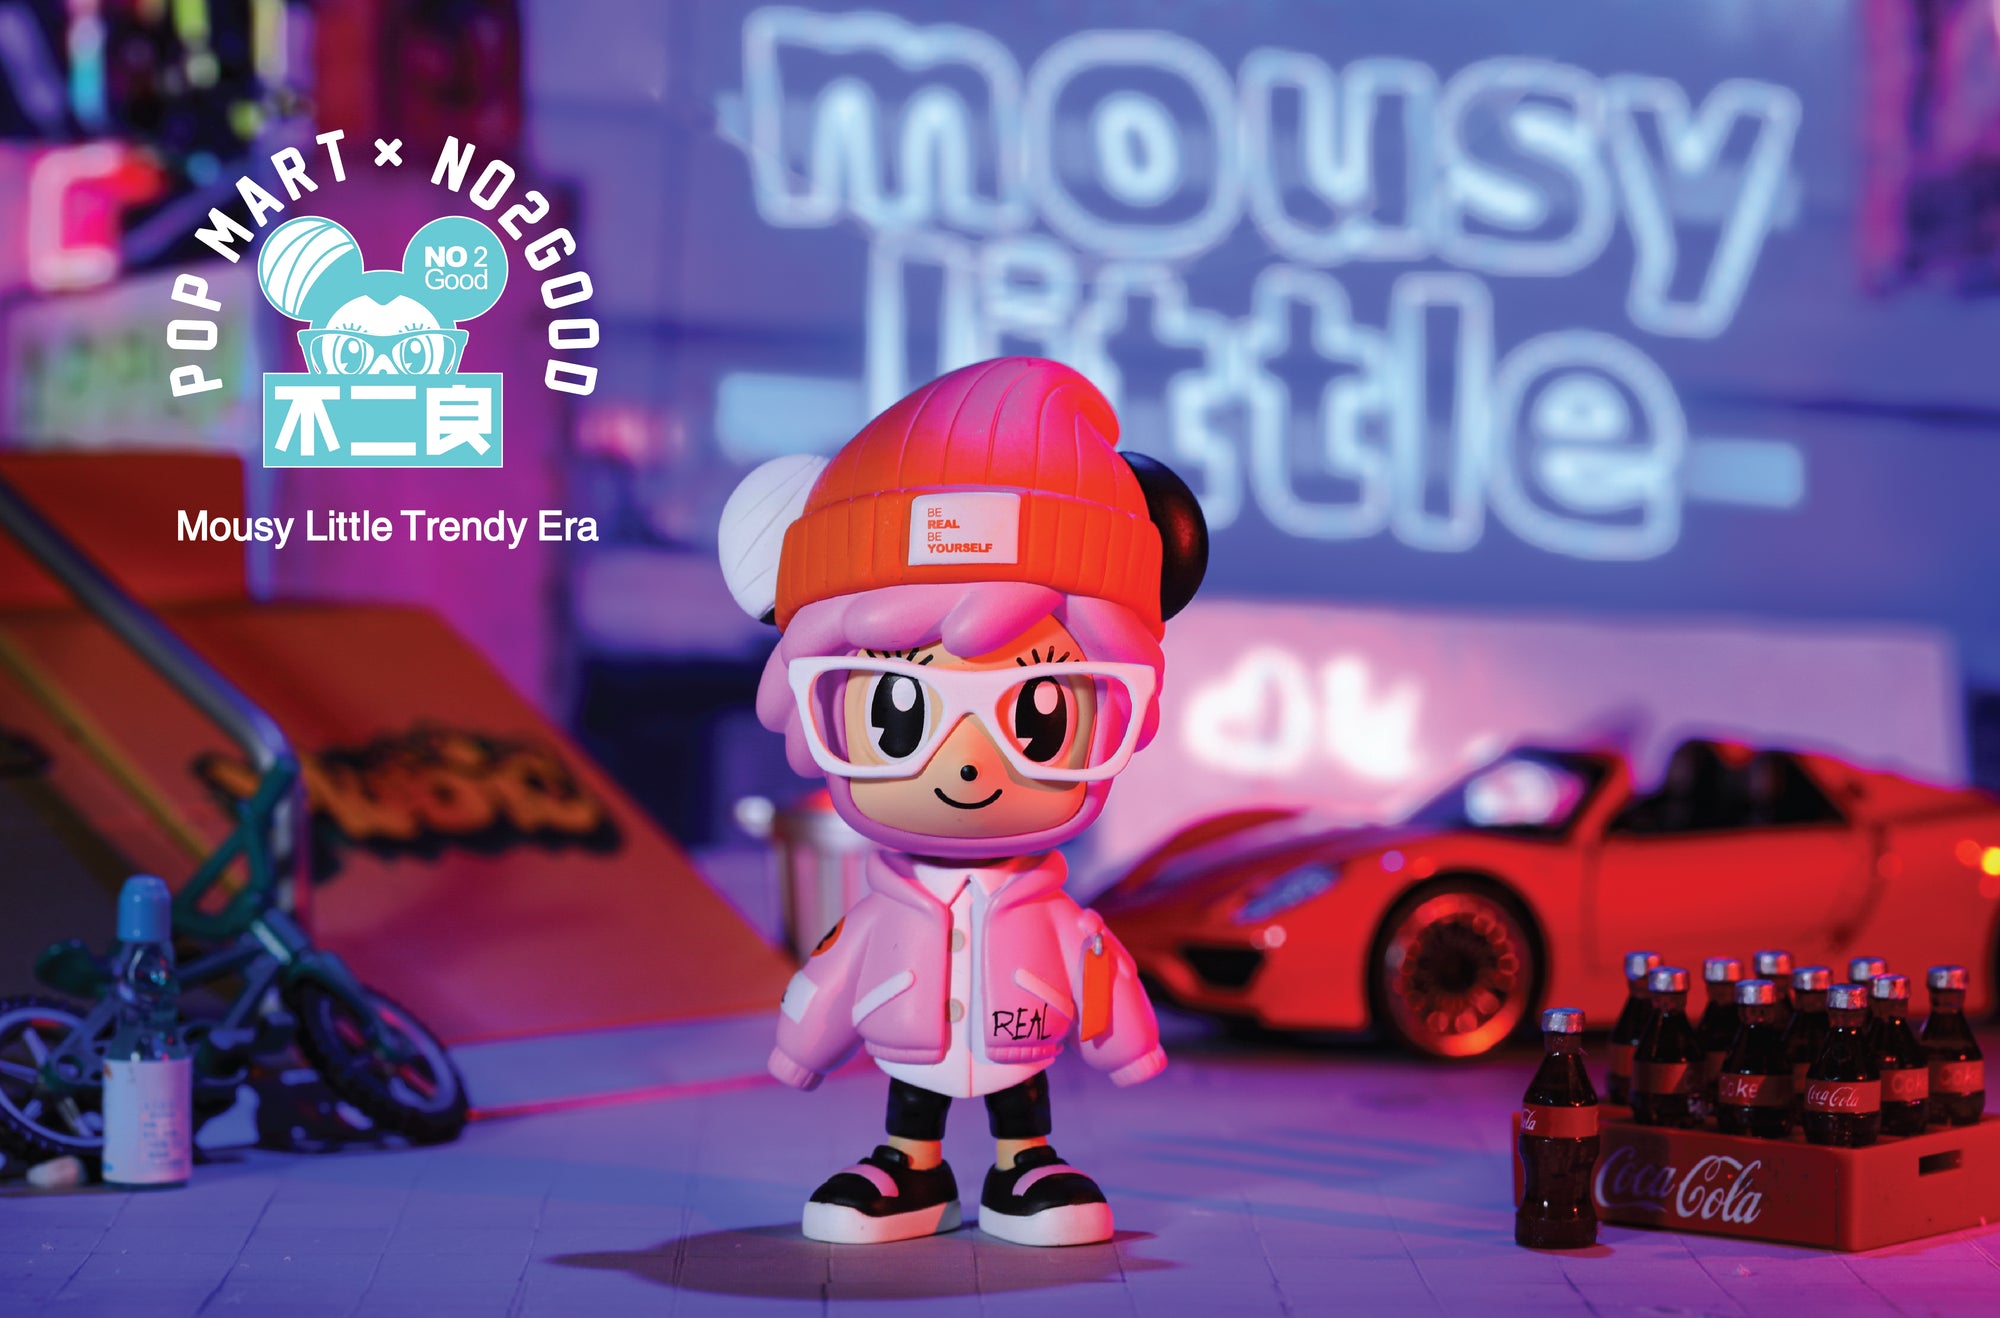 Mousy Little x Stay Real Trendy Era Blind Box Toy Series by No2Good x POP MART